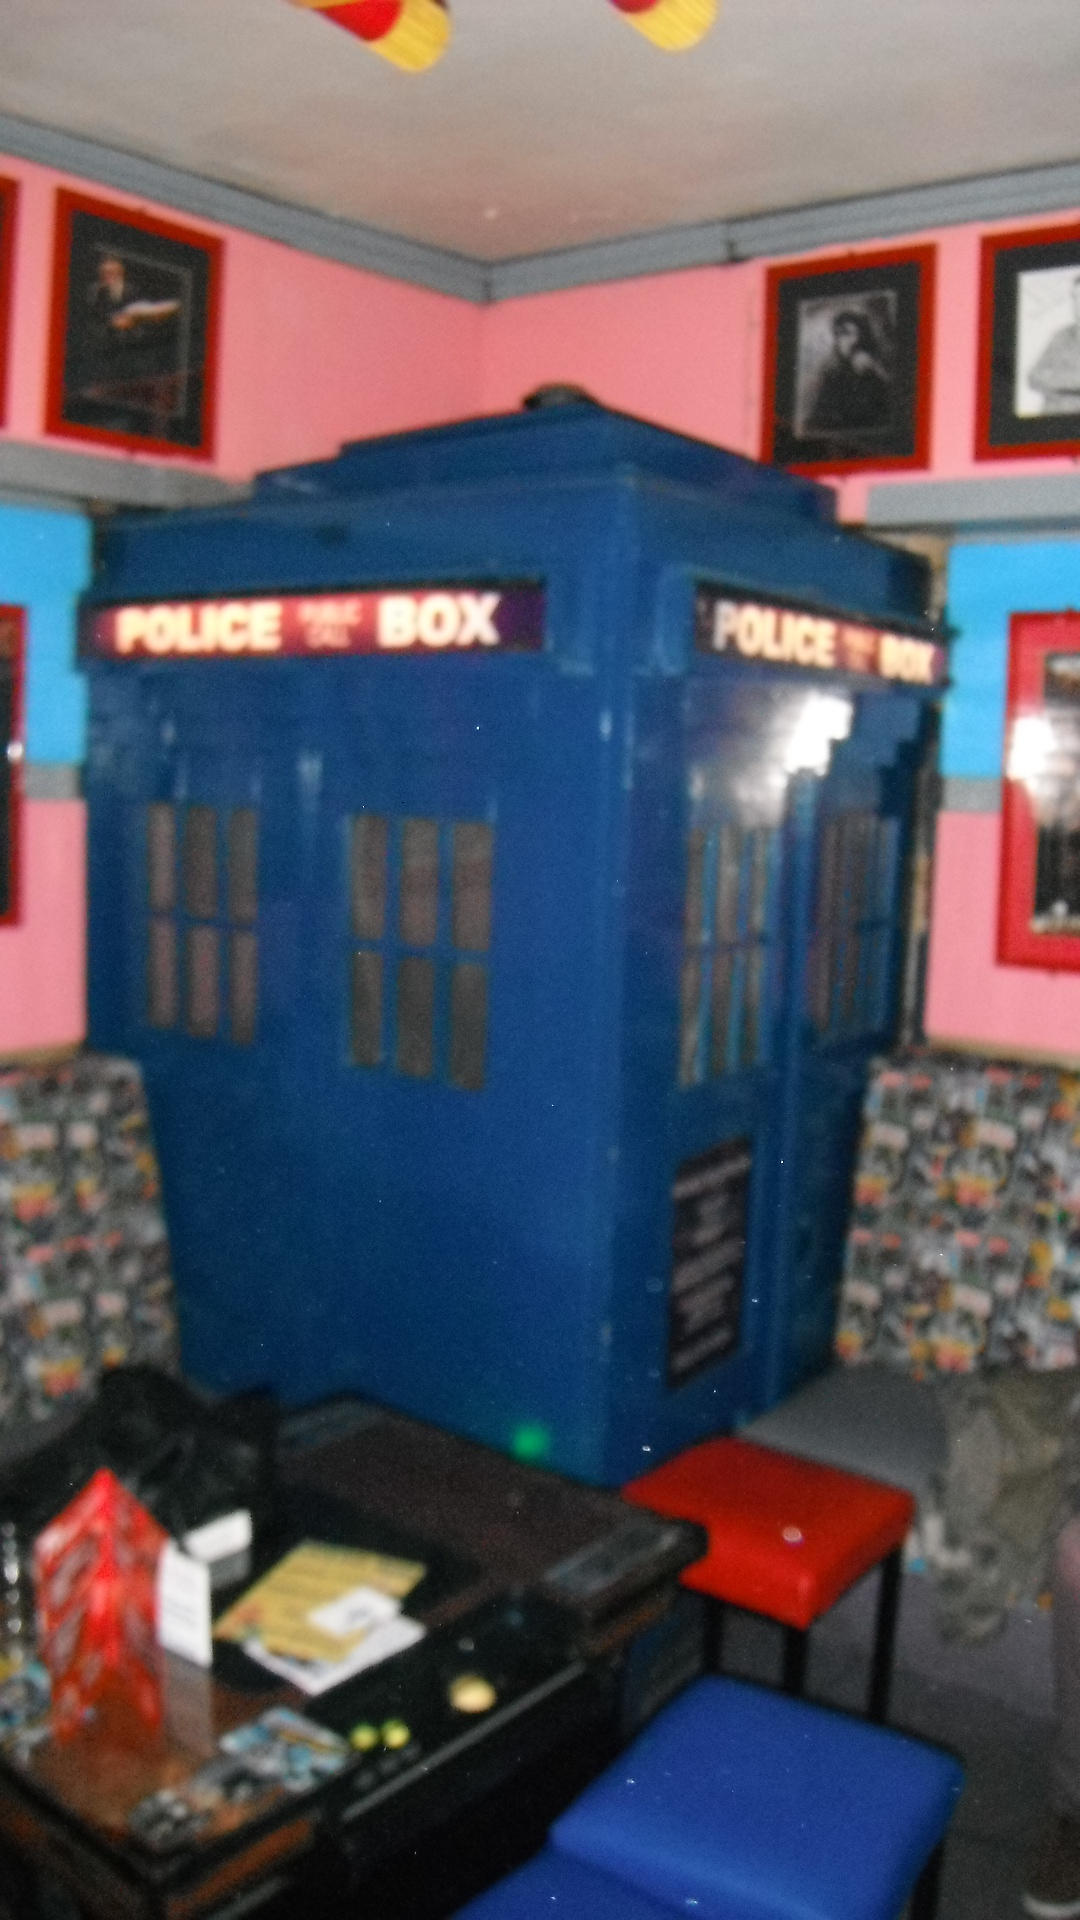 Photo taken by me - The TARDIS in Manchester